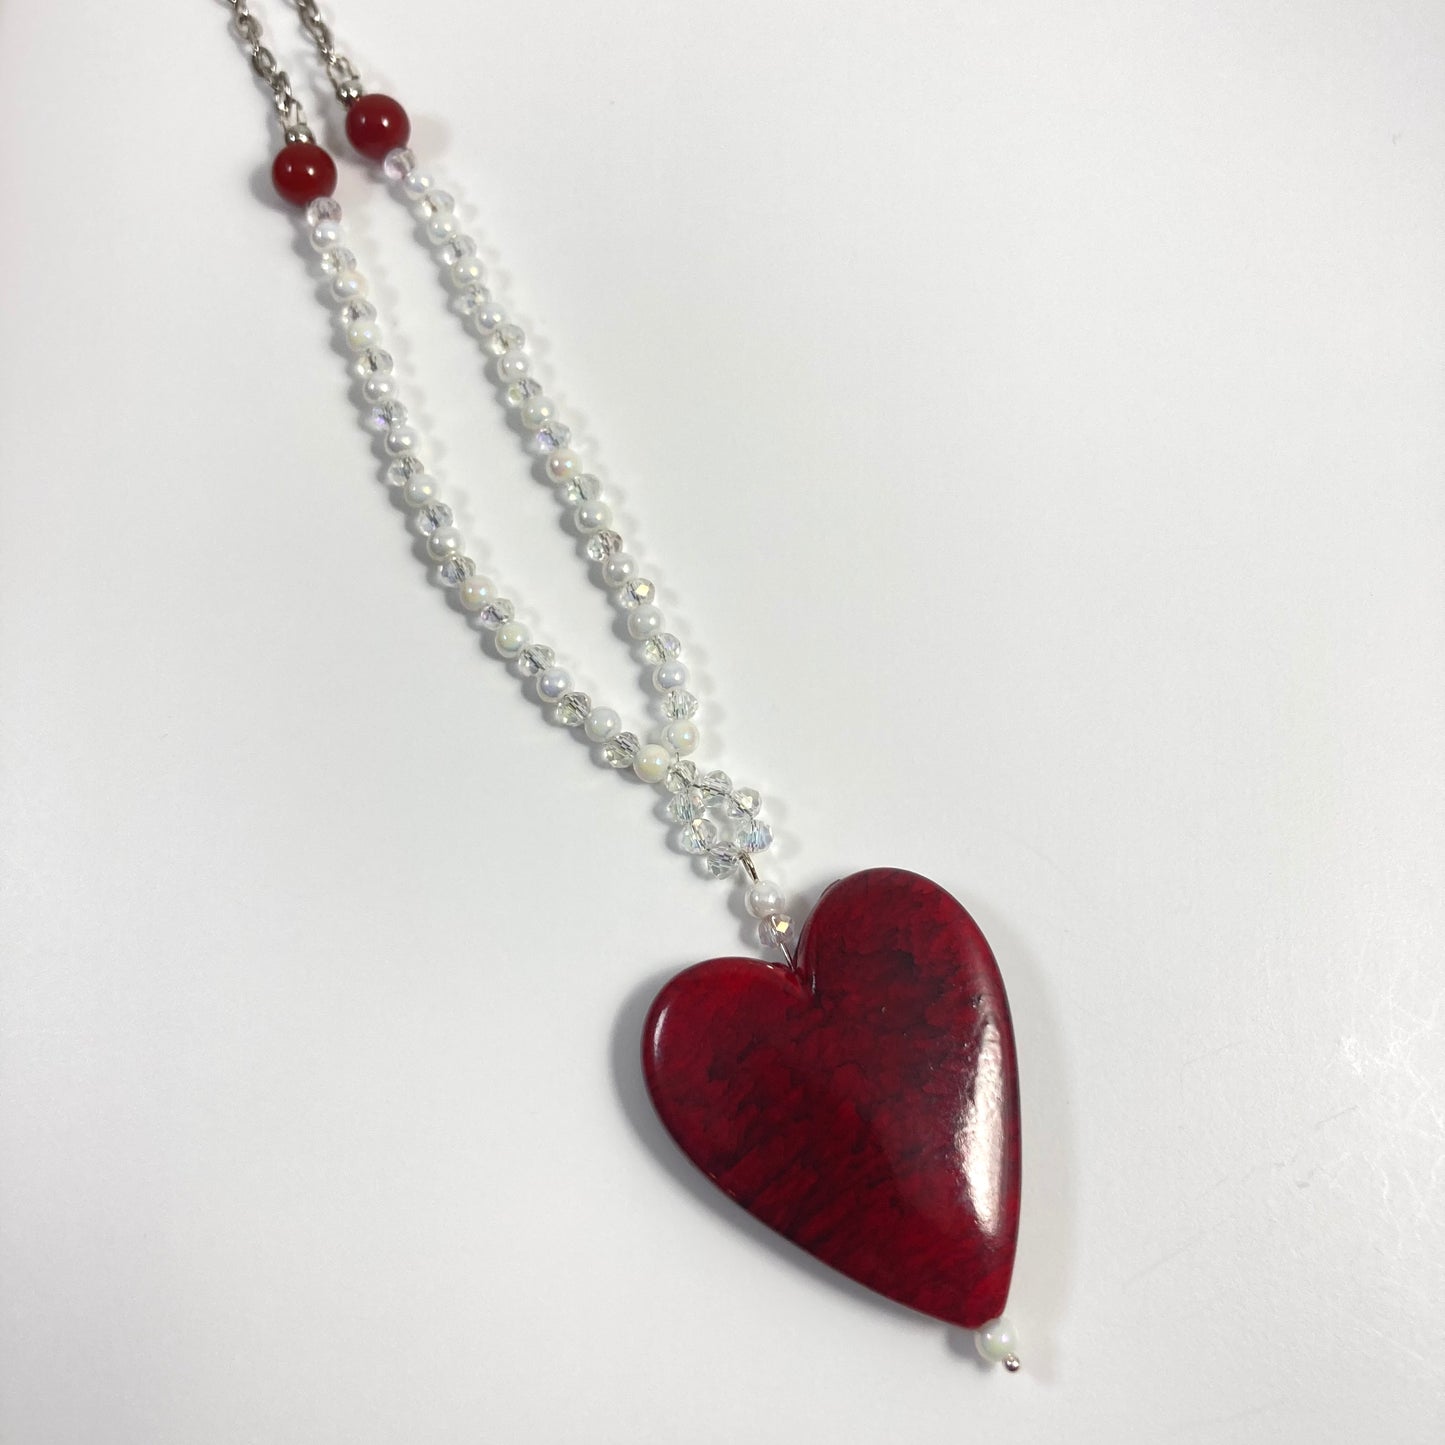 N24-C4 - Red, White & Clear Necklace w/ Red Heart Focal on Silver Chain